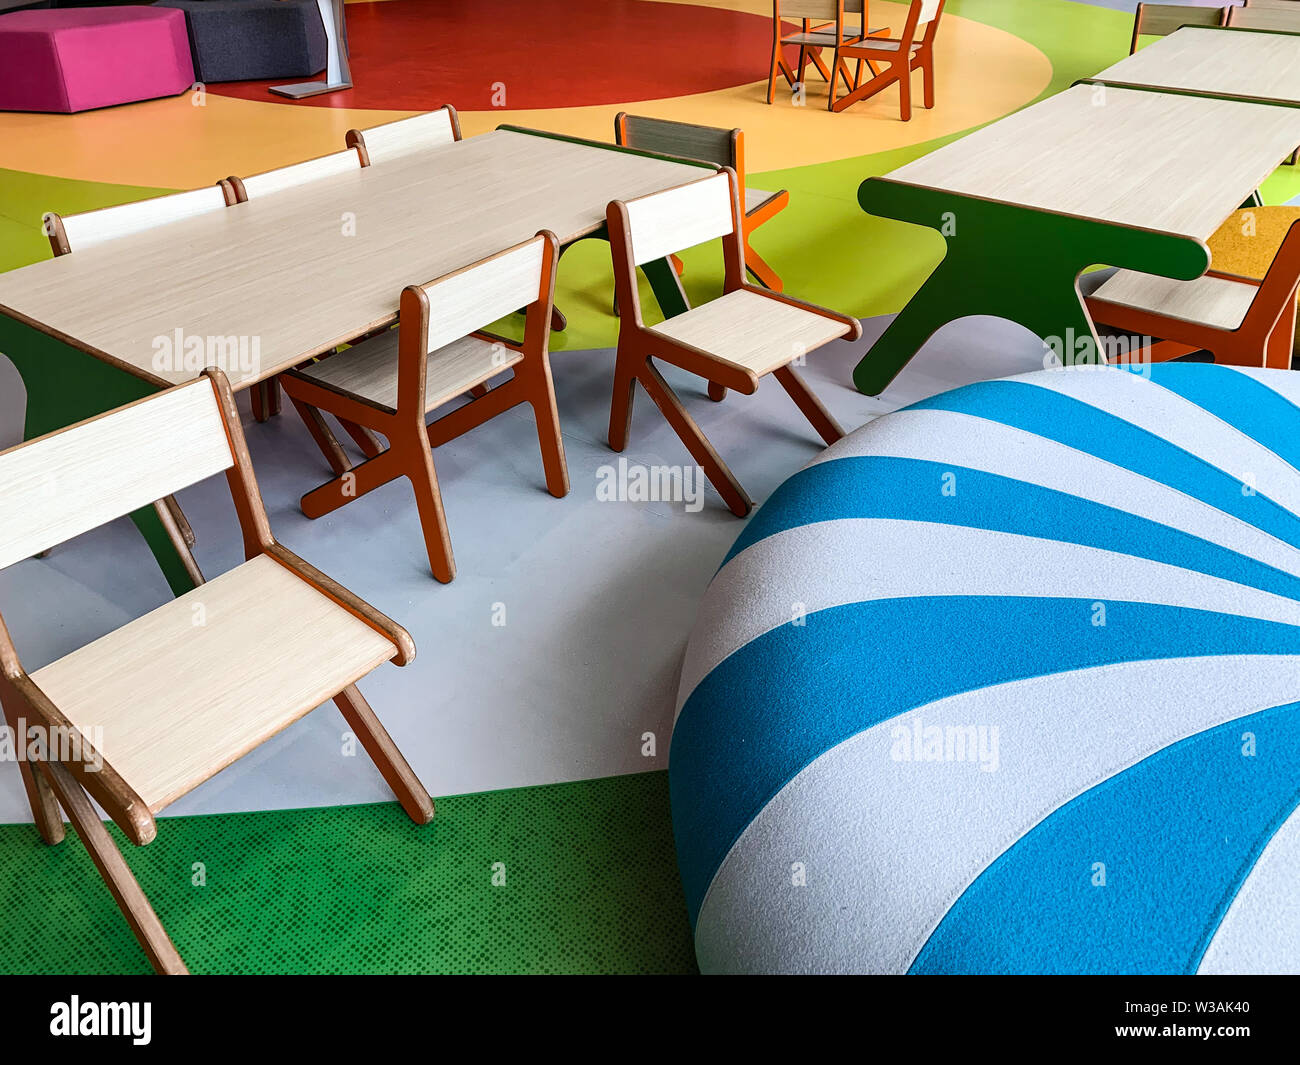 Modern and colorful playing area with chairs and tables for kids in a waiting room or a public terminal. Family friendly concept. Stock Photo